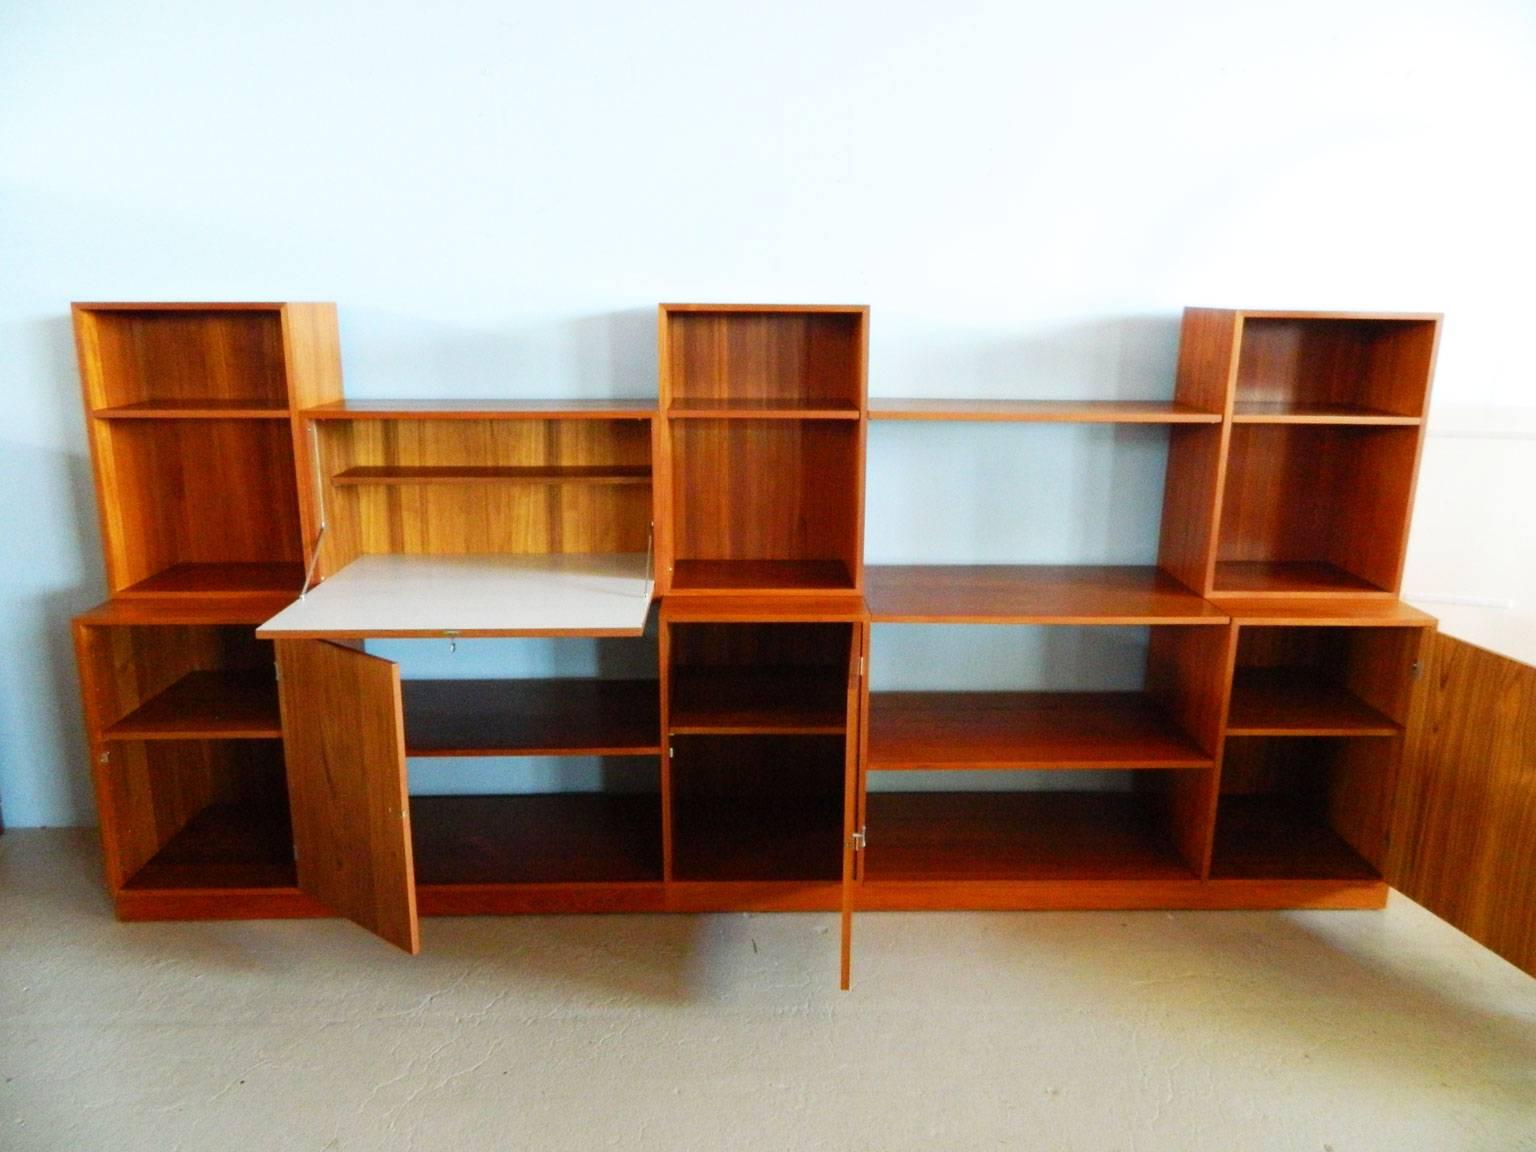 This Cresco teak wall system by Finn Juhl consists of two base pieces, three cabinets with doors, three open cabinets, a drop-front desk, six small shelves and four large shelves. 

Lower cabinets are 18.5